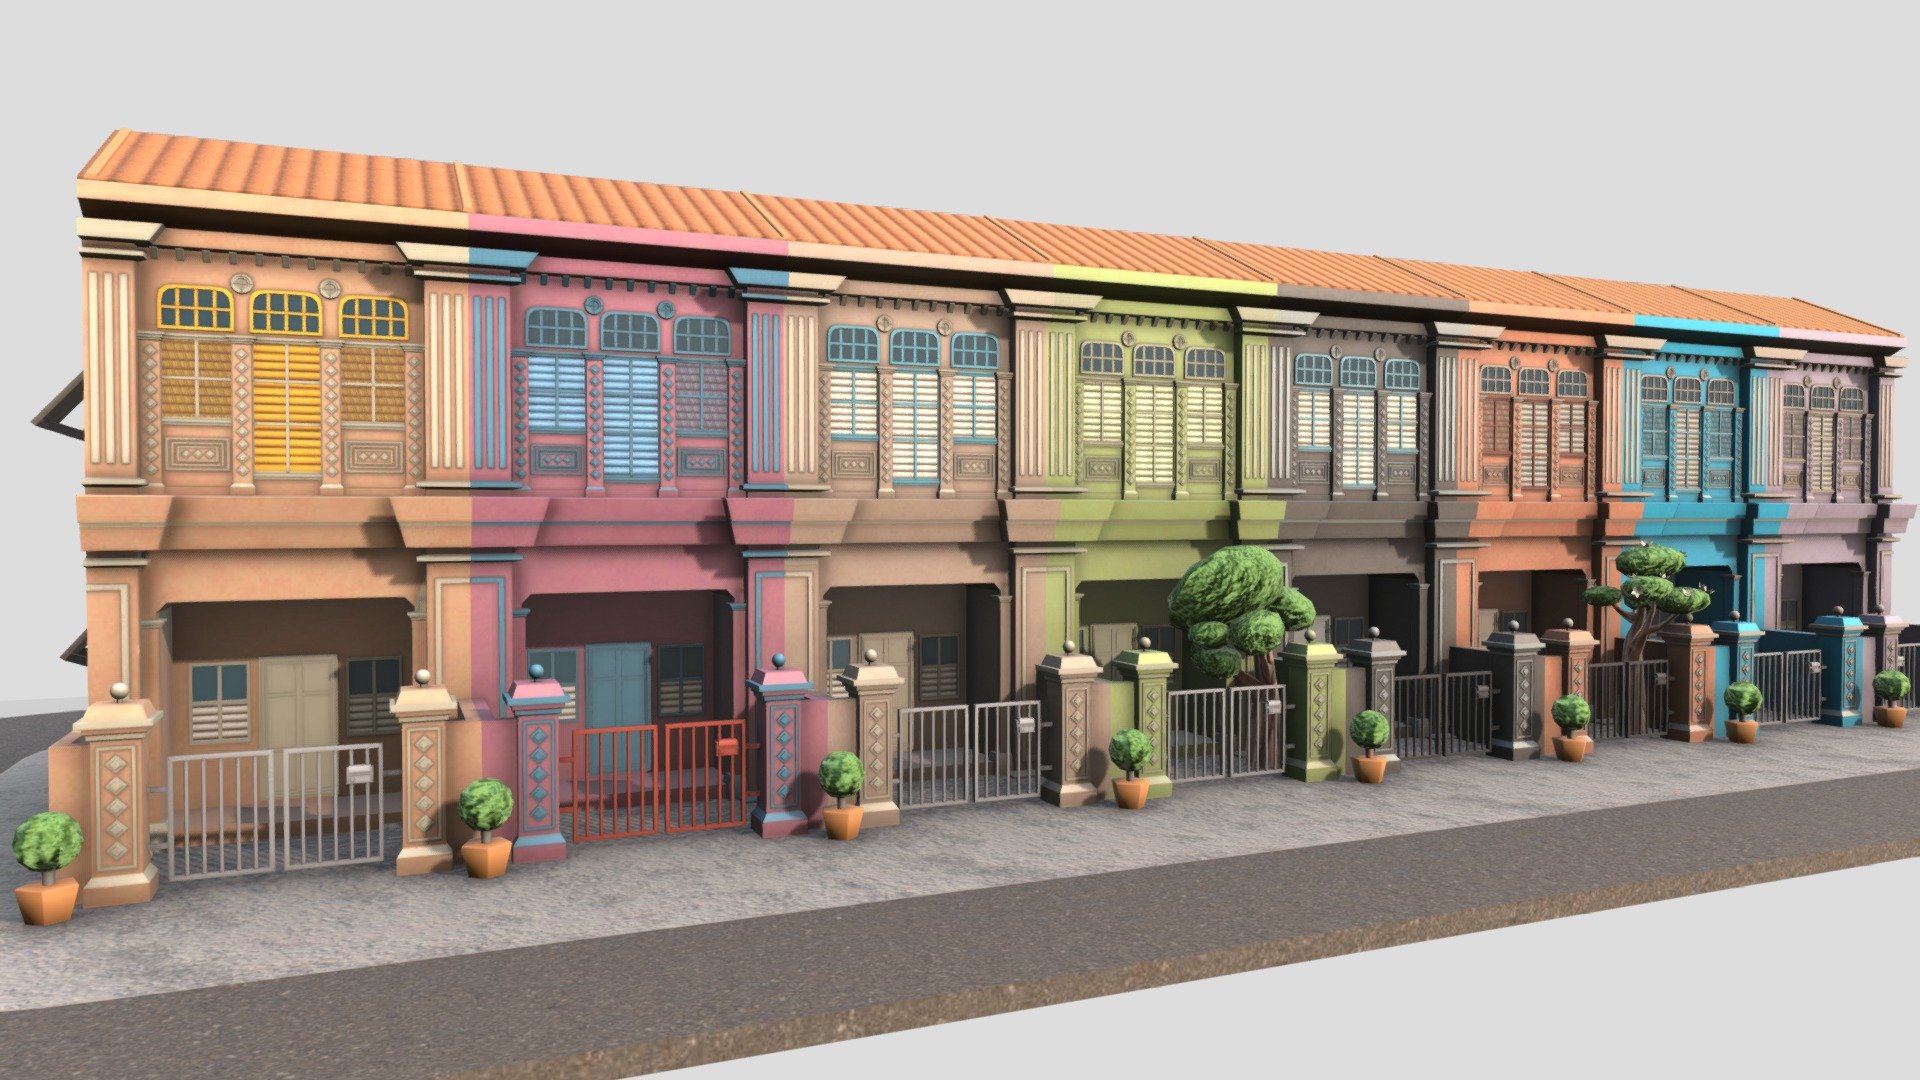 Stylised row of iconic, colourful shophouses along Joo Chiat Road.

Login to STB’s Tourism Information &amp; Services Hub for free downloads:
https://tih.stb.gov.sg/content/tih/en/marketing-and-media-assets/digital-images-andvideoslisting/digital-images-and-videos-detail.1047eabbd18ff5247e789f08c2613d03209.Joo+Chiat+Shophouses.html - Joo Chiat Shophouses - 3D model by STB-TC 3d model